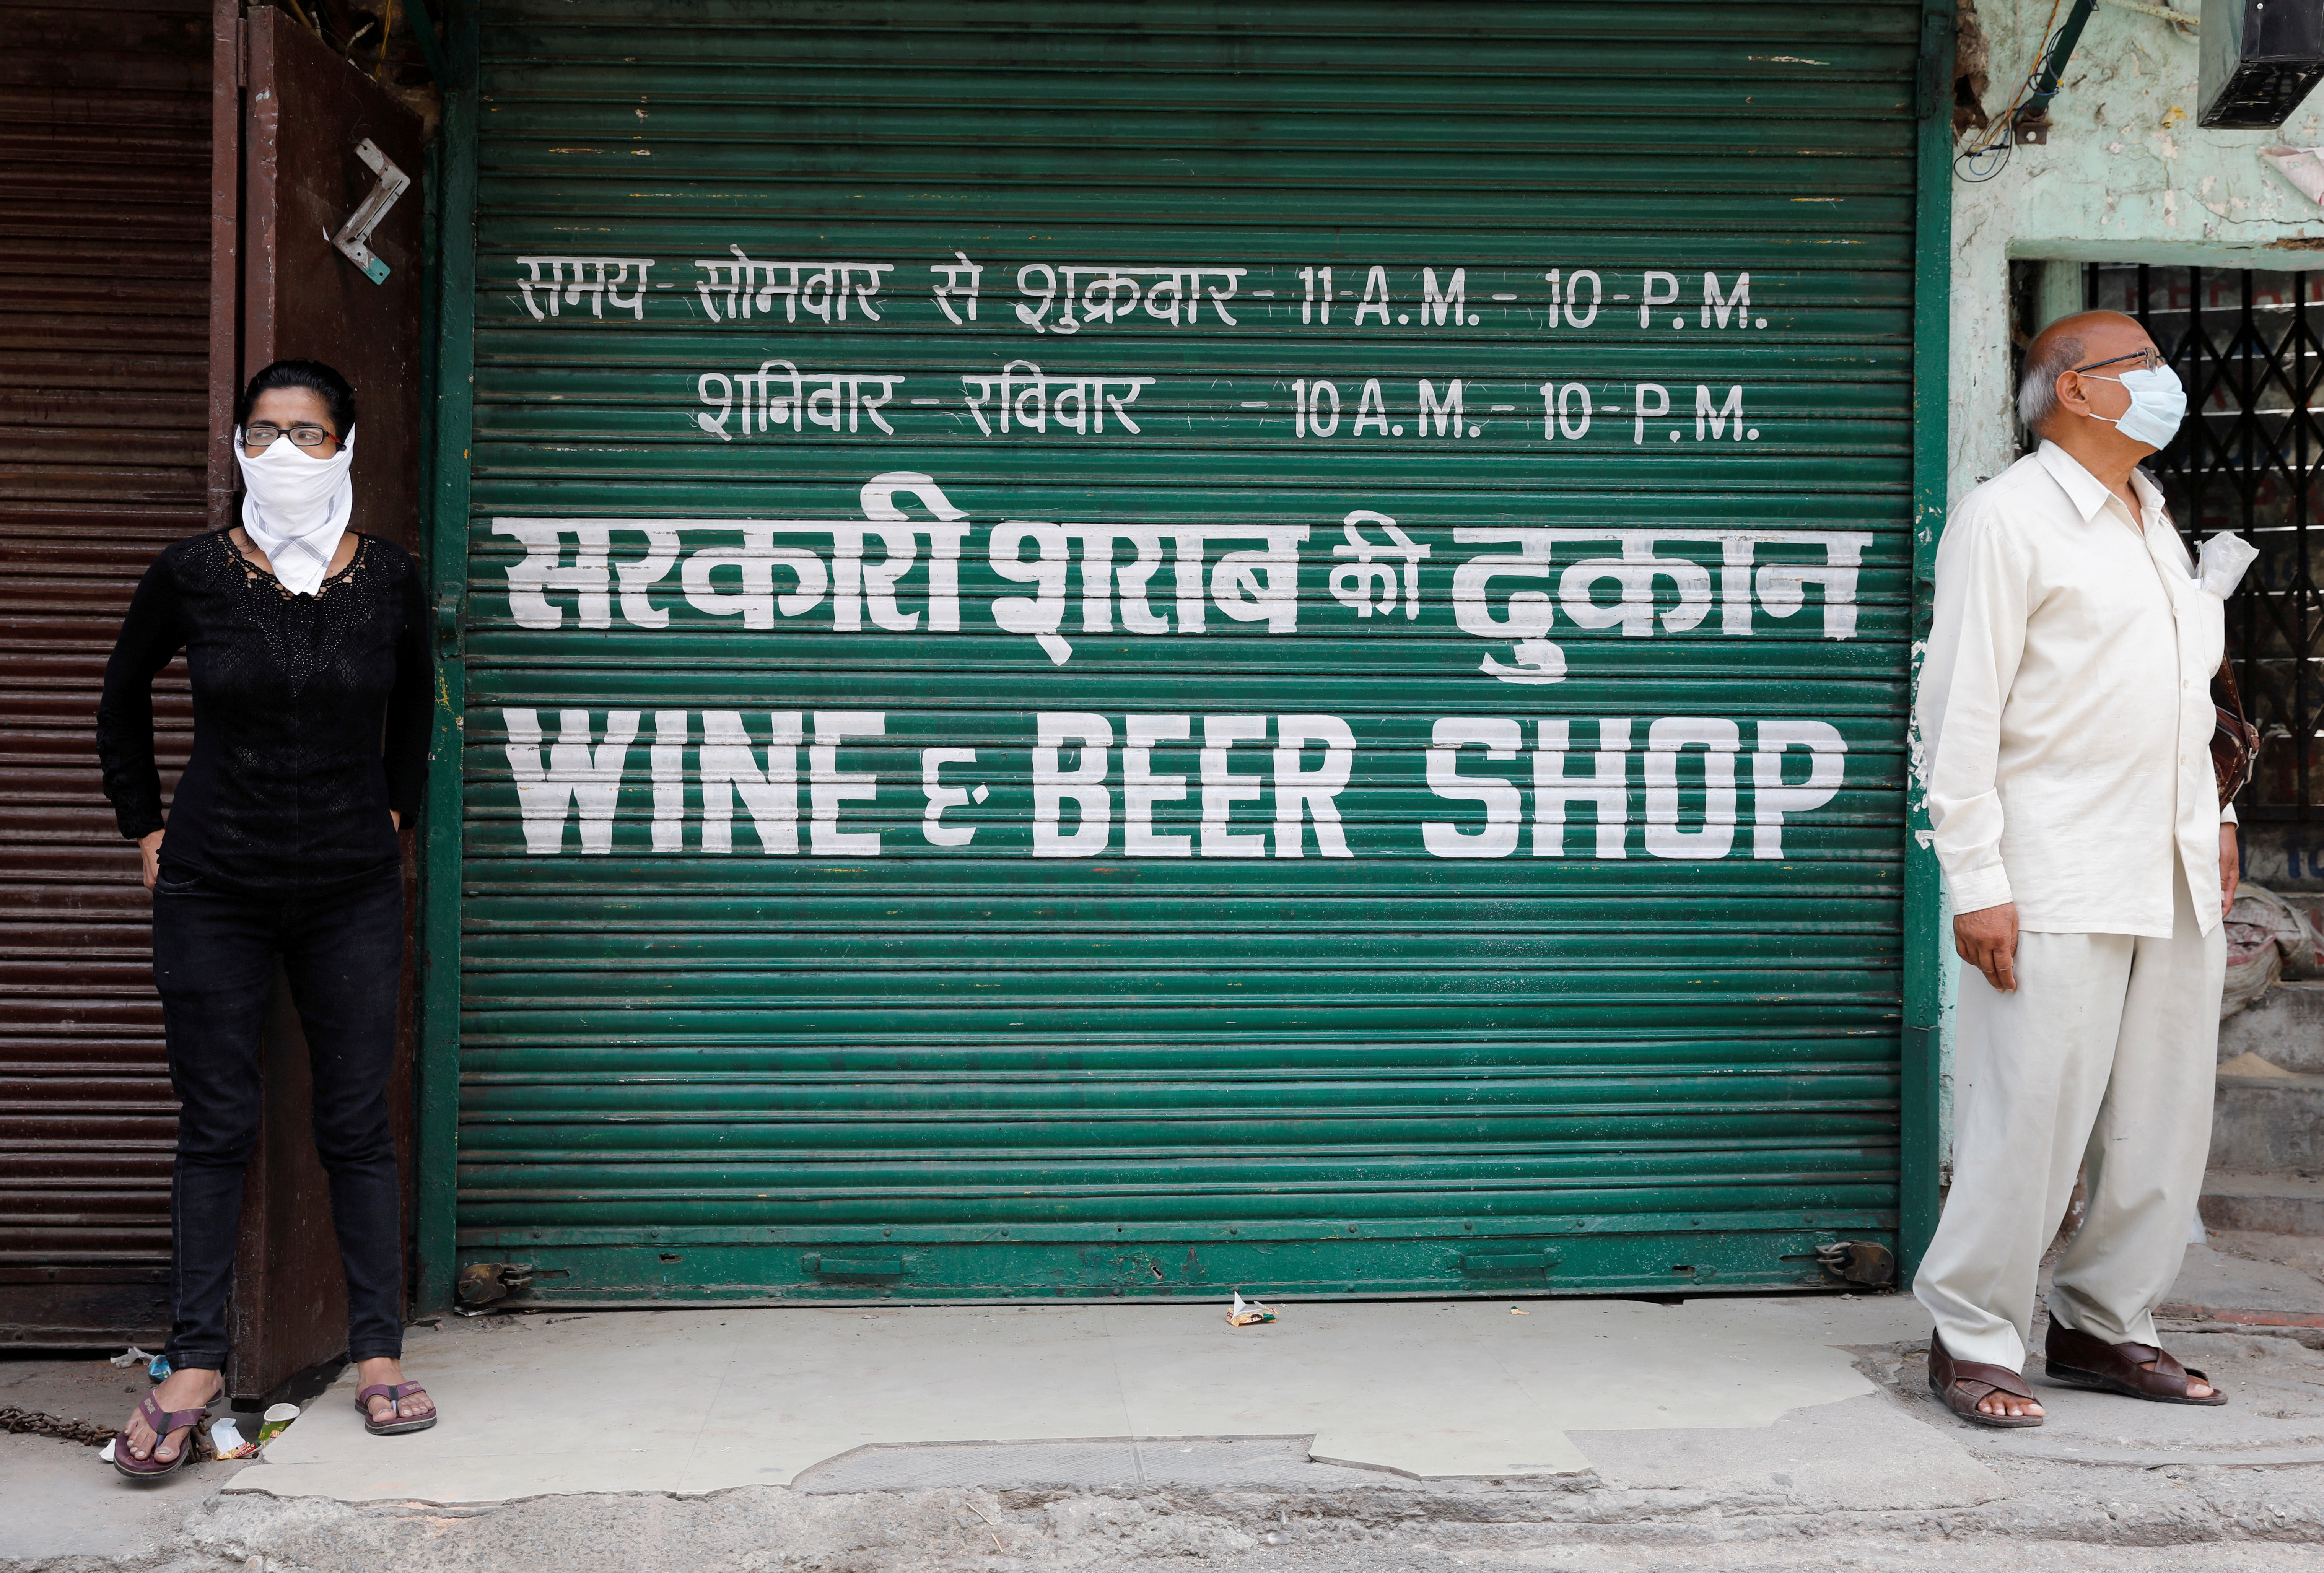 FILE PIX: Exterior of wine and beer shop in New Delhi, India